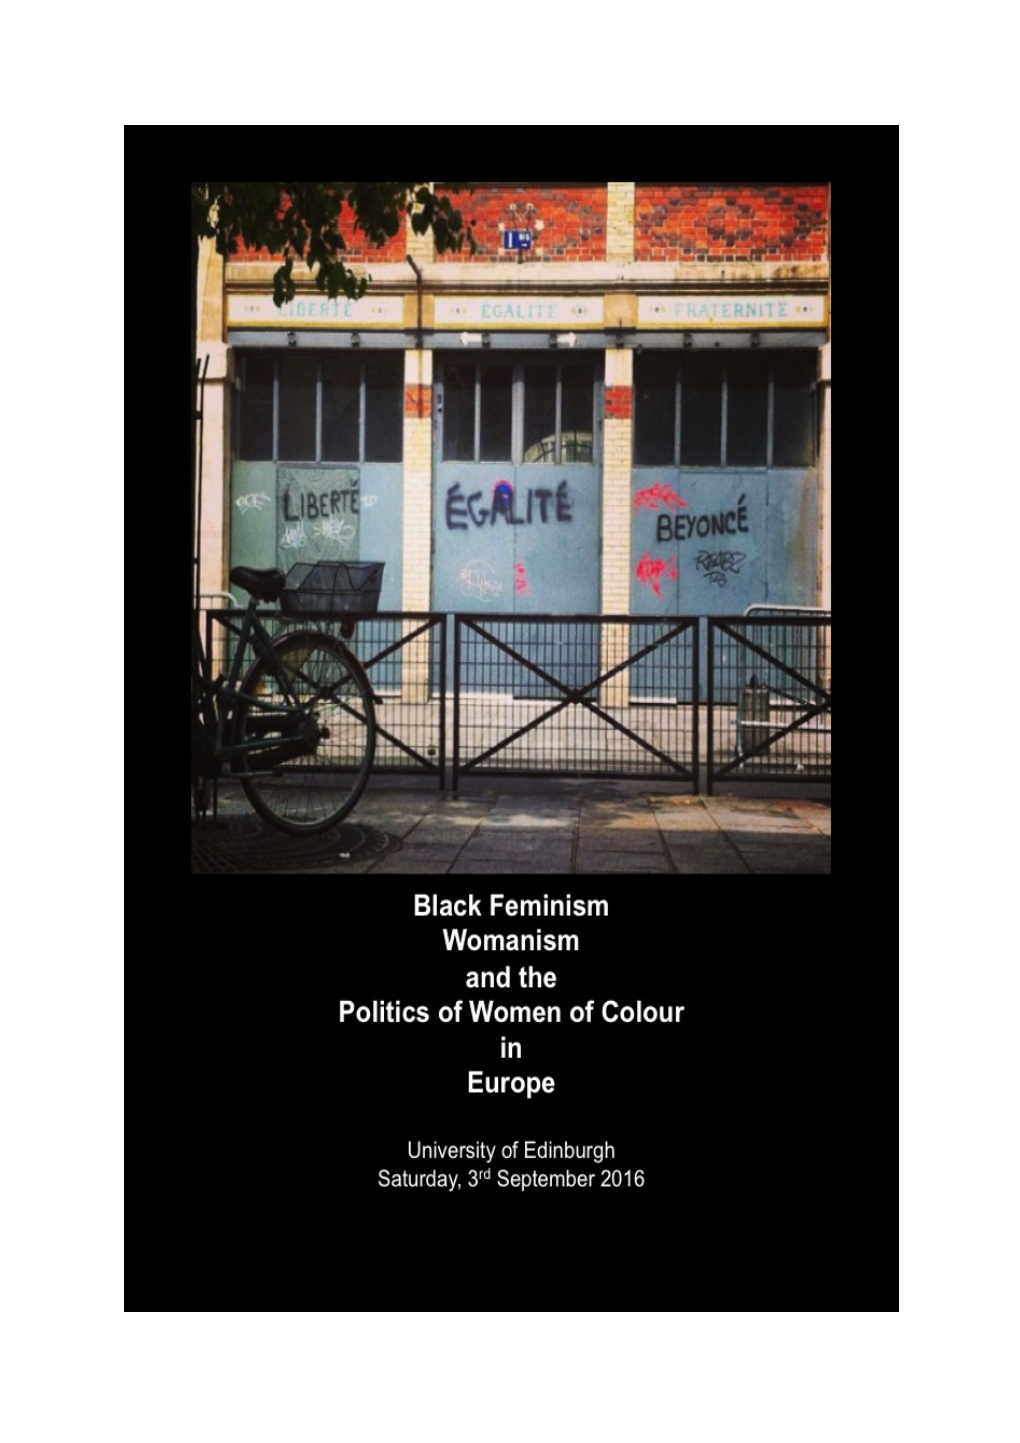 Black Feminism, Womanism and the Politics of Women of Colour in Europe